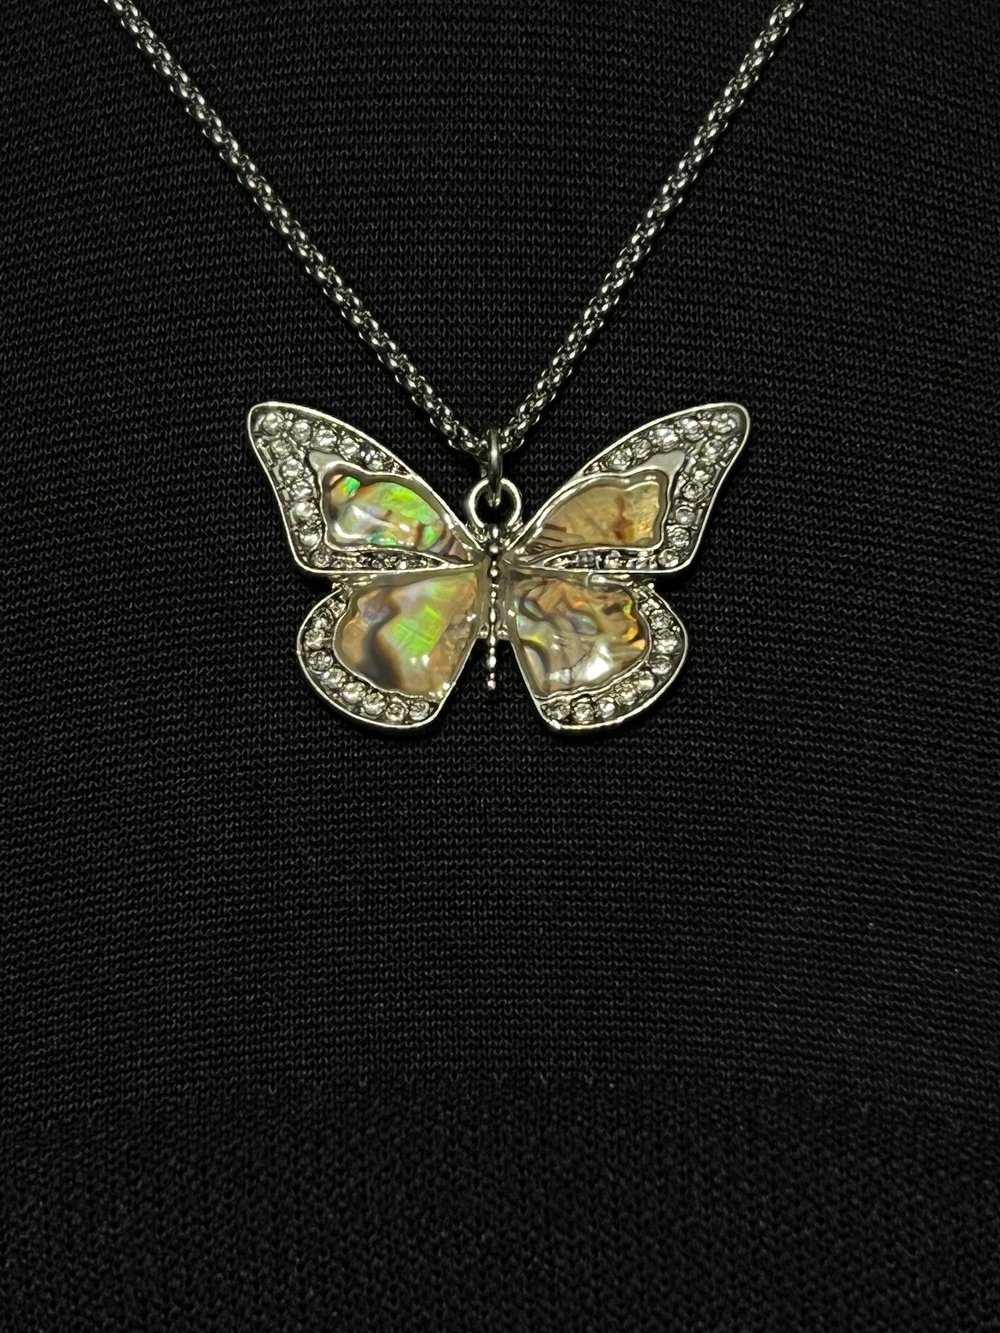 Abalone Butterfly Pendant and Stainless Steel Chain Necklace